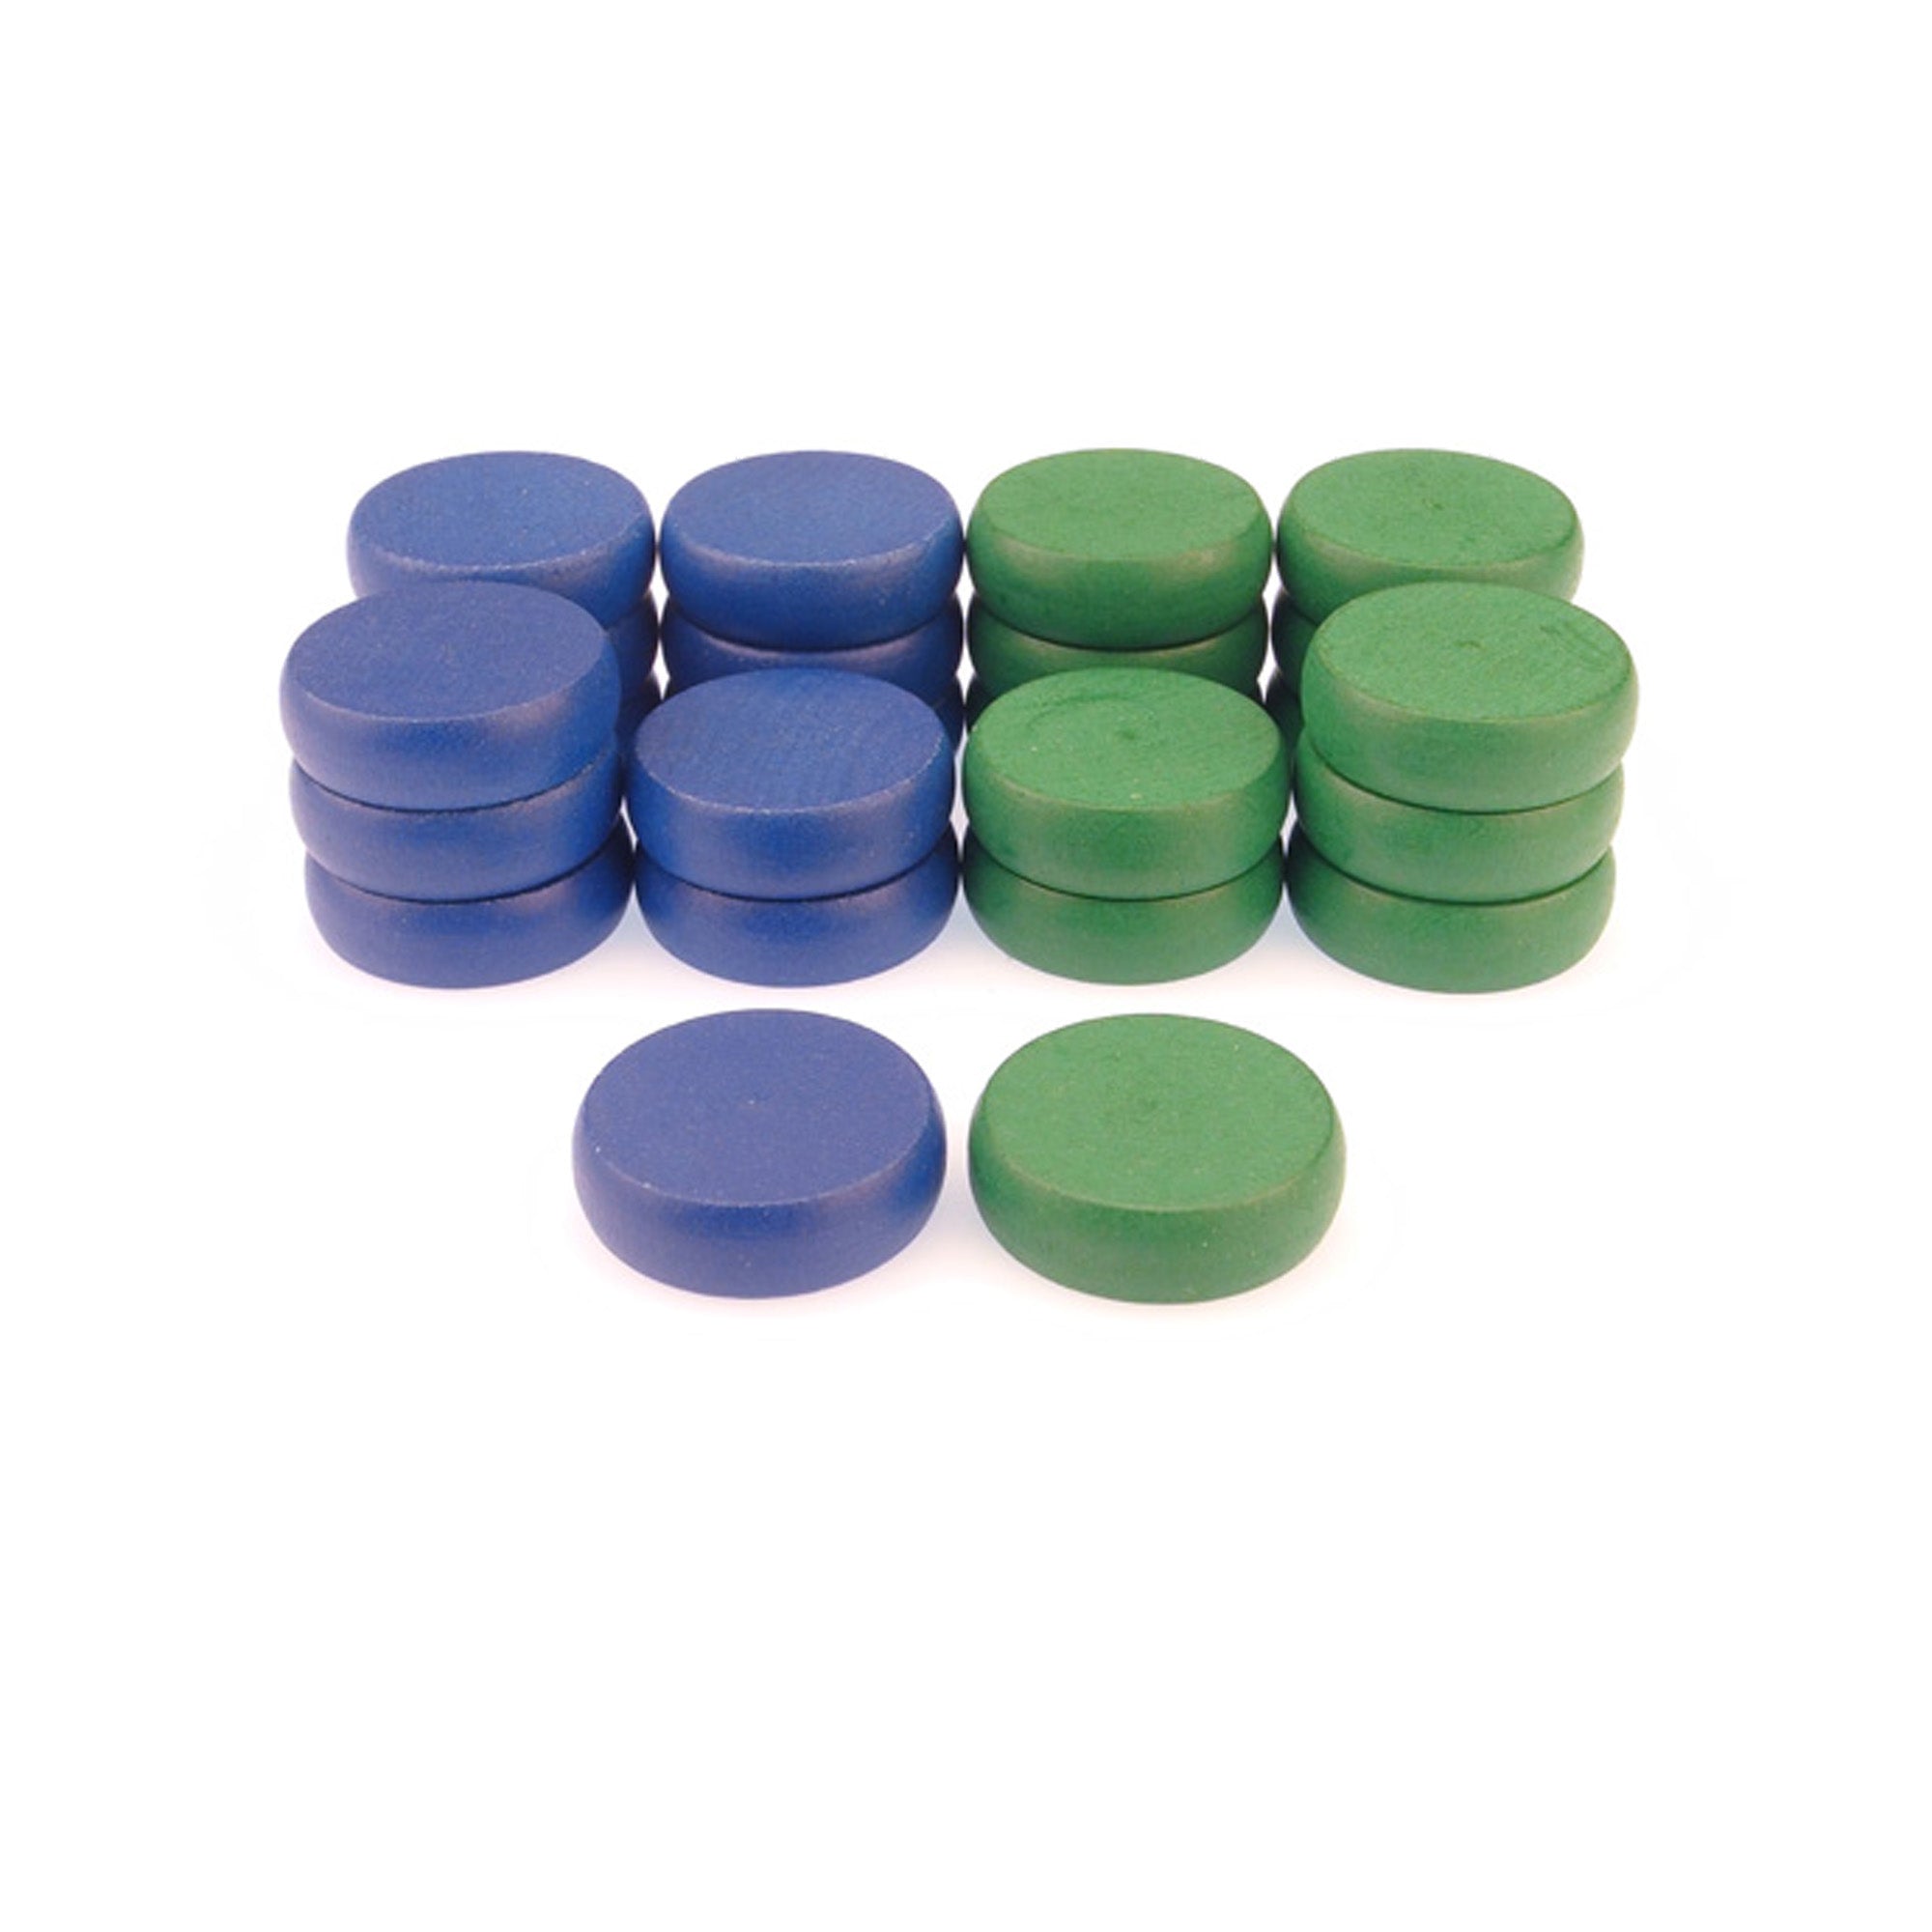 Crokinole Tournament Discs - 13 Blue and 13 Green - Size 1-1/4" - 24 Needed + 2 Spare Discs - Bag Included - Carrom Alternative